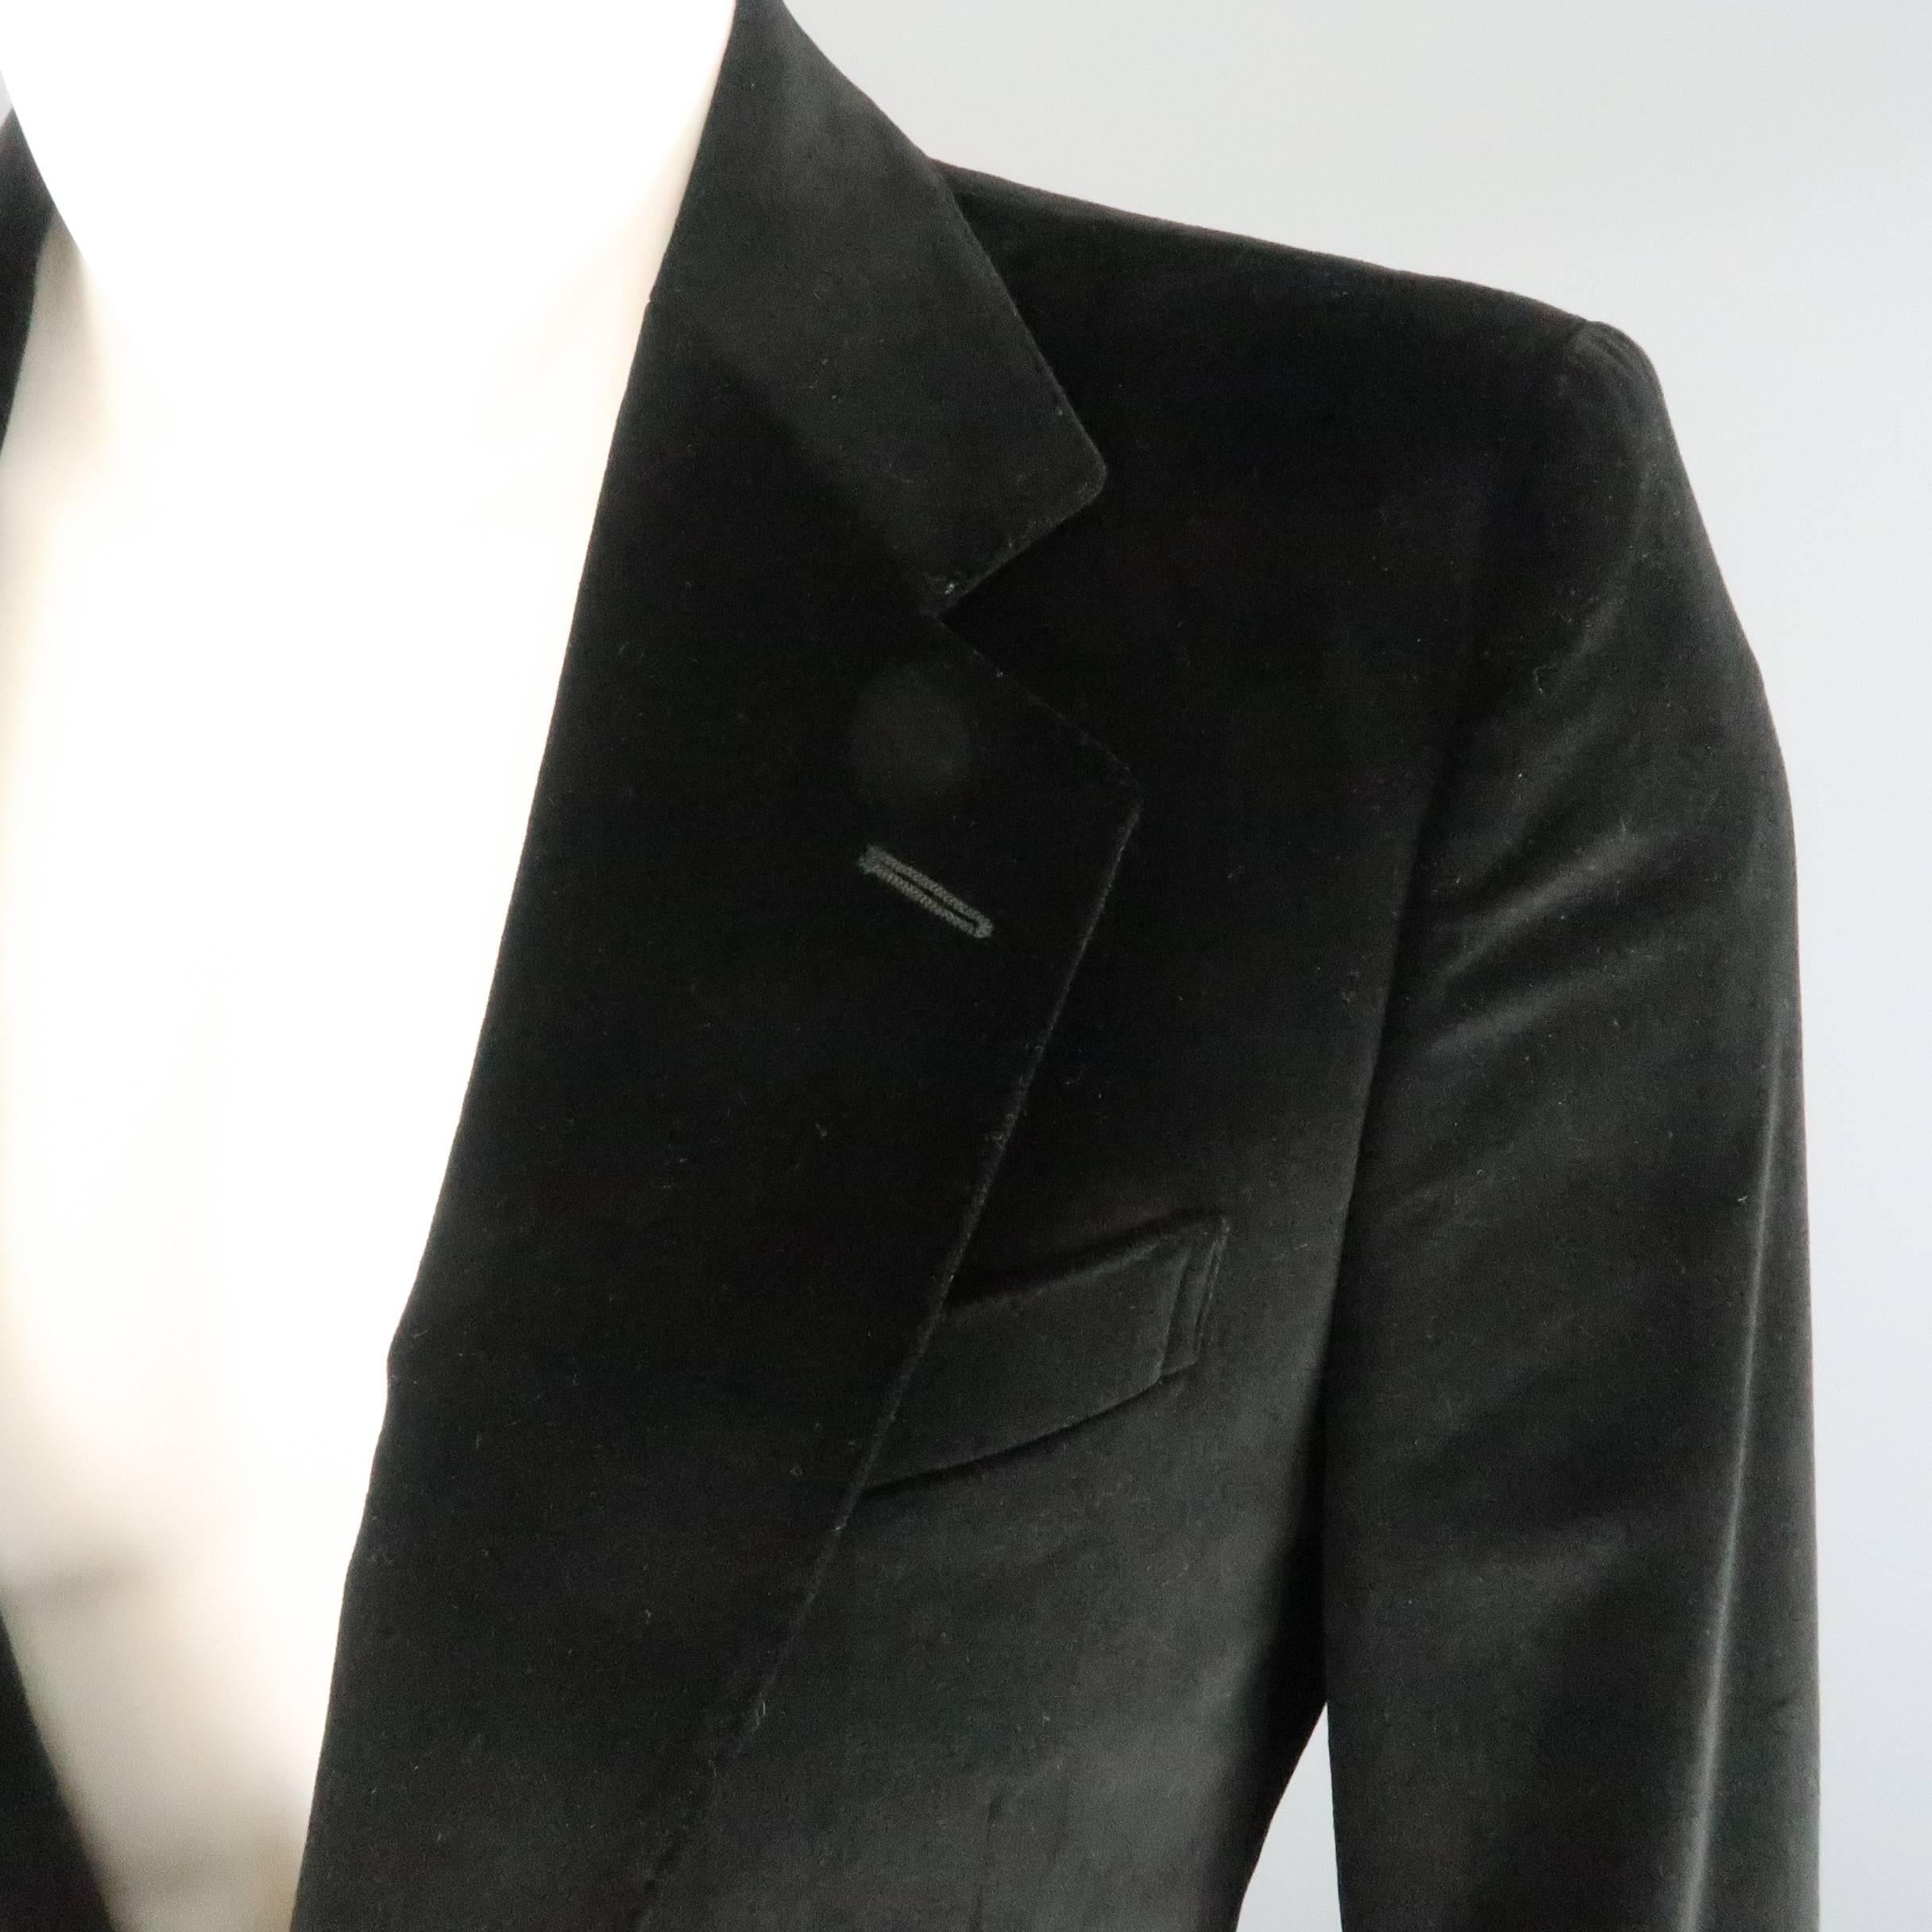 YVES SAINT LAURENT by TOM FORD sport coat comes in black cotton velvet and features a notch lapel with top stitching, two button closure, faux flap pockets, tab cuffs, and single vented back. Made in Italy.
 
Excellent Pre-Owned Condition.
Marked: